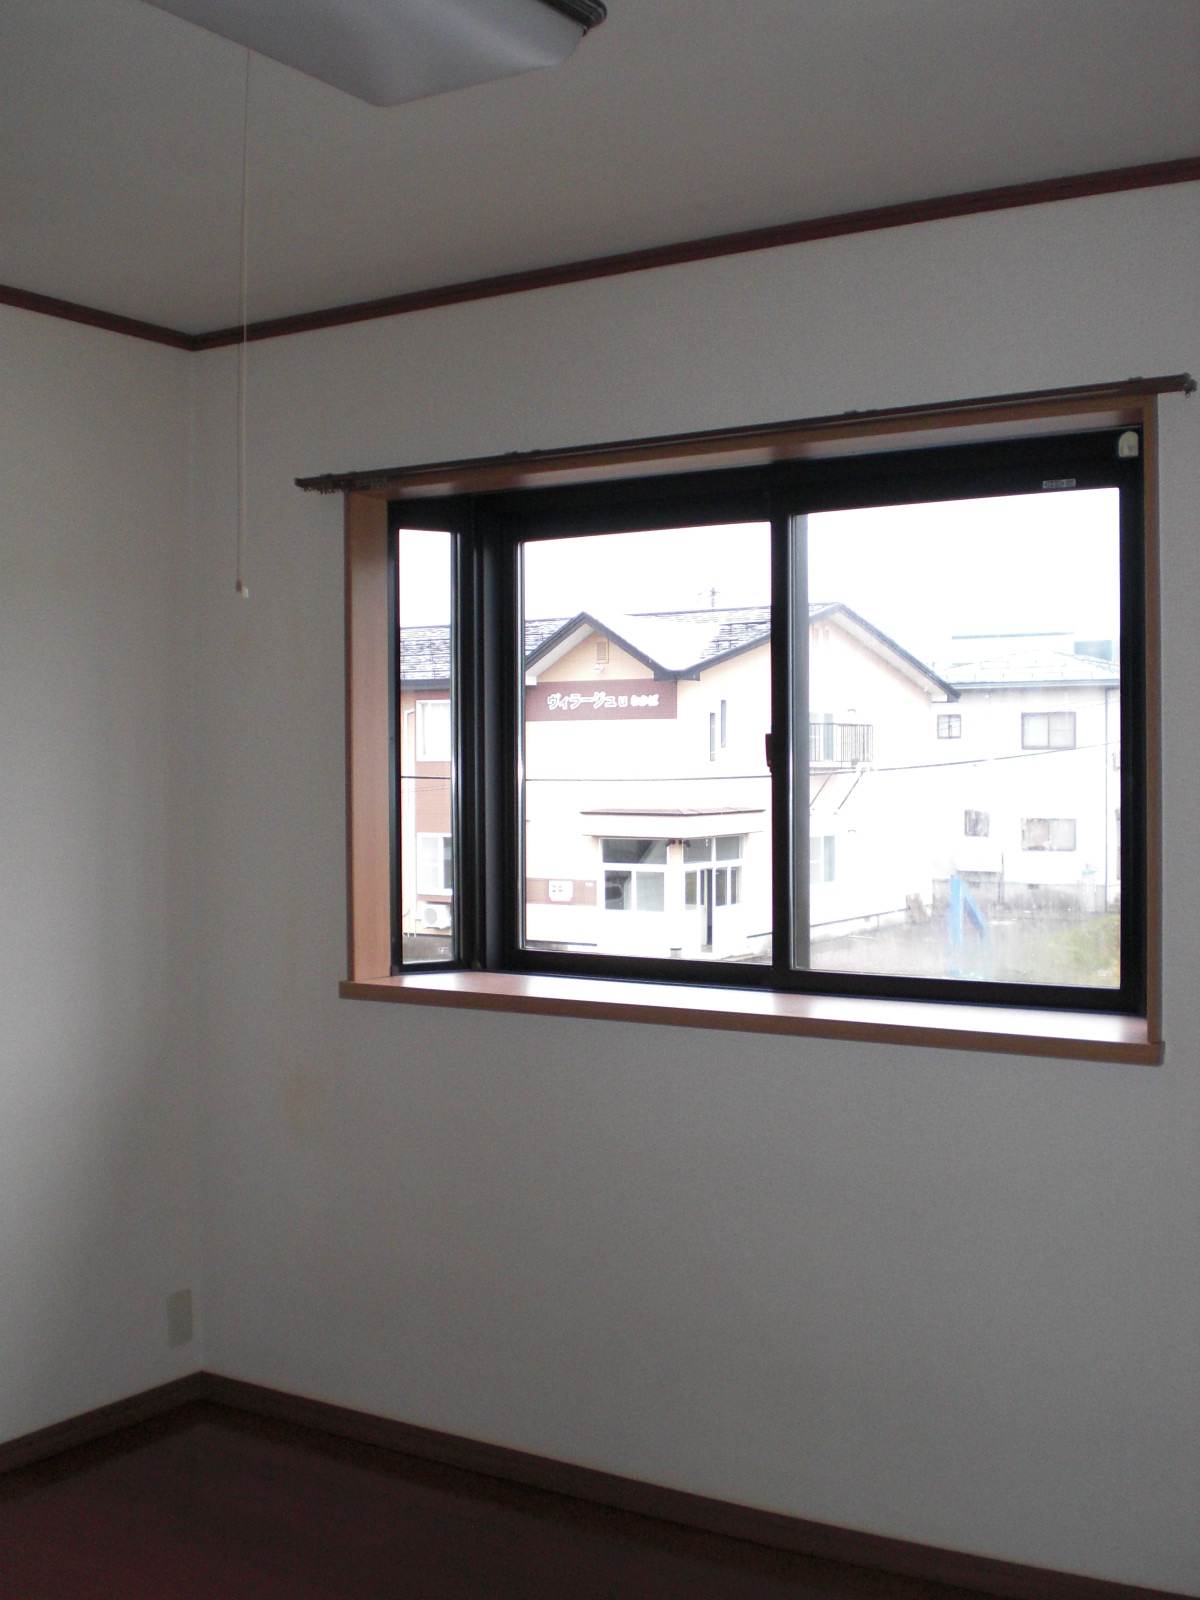 Other room space. 5 Pledge of likely spread usability if there is a bay window in the Western-style